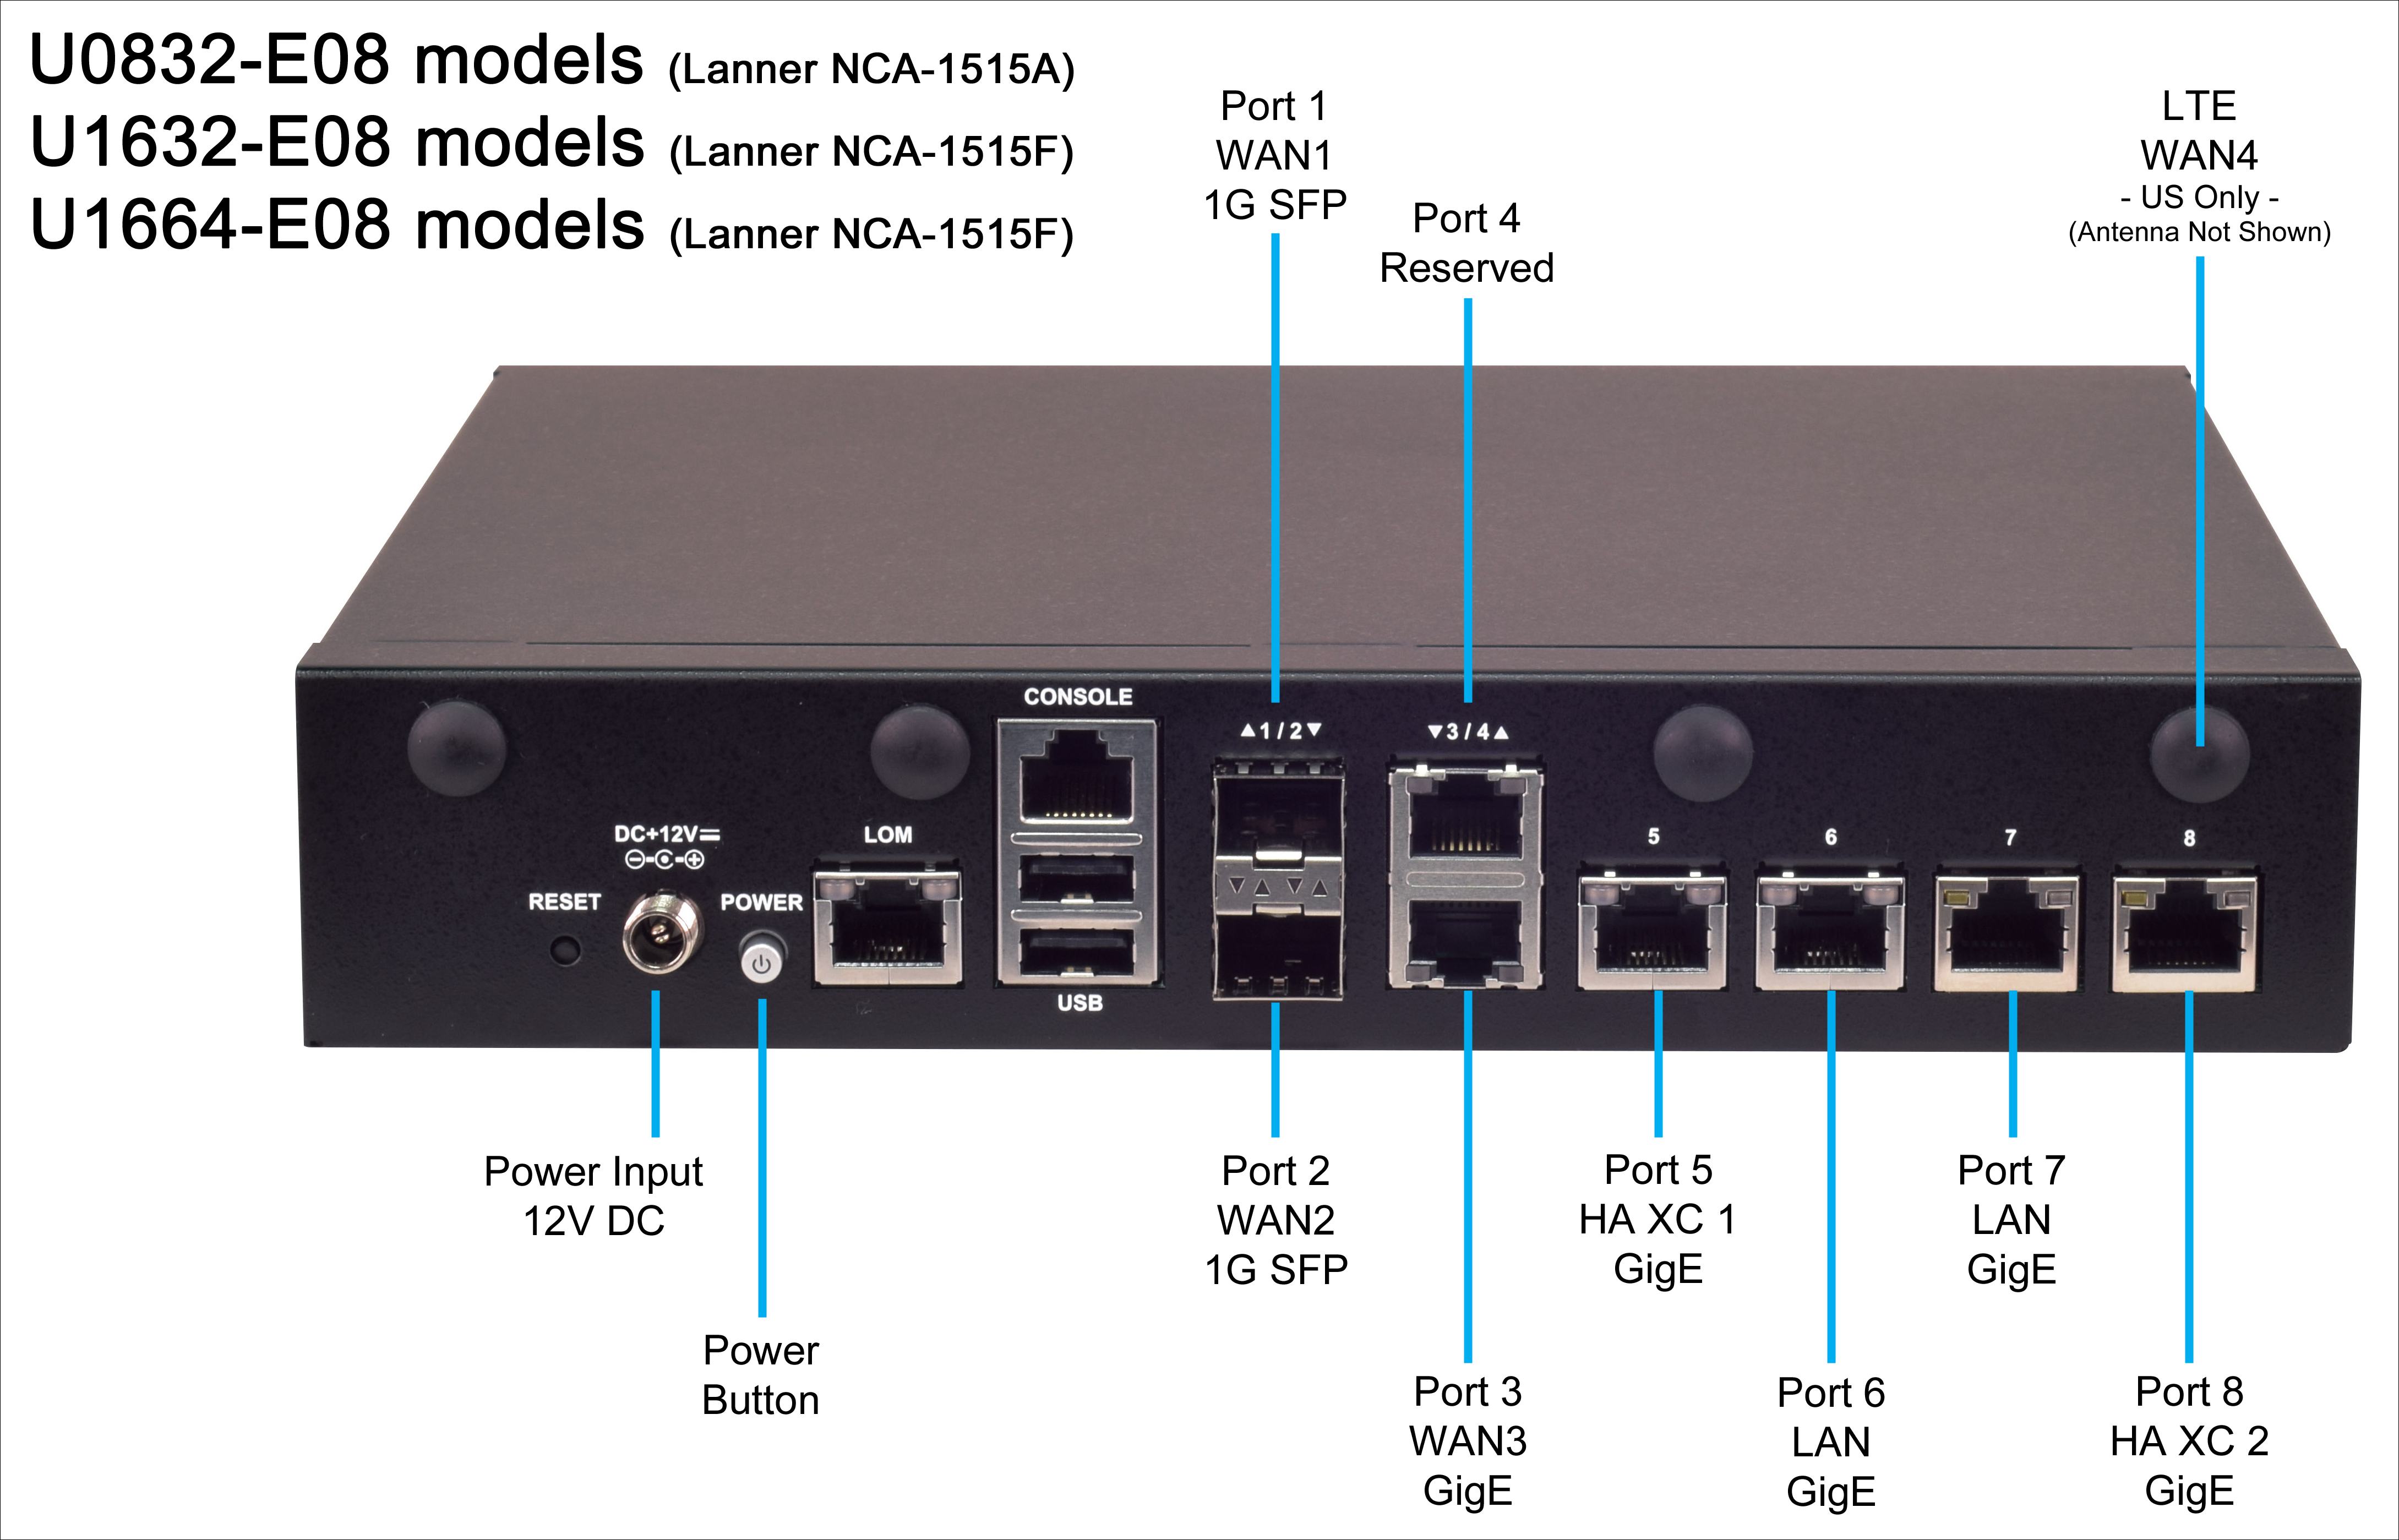 Service ports on the Edge Gateway device (Lanner 1515 series).